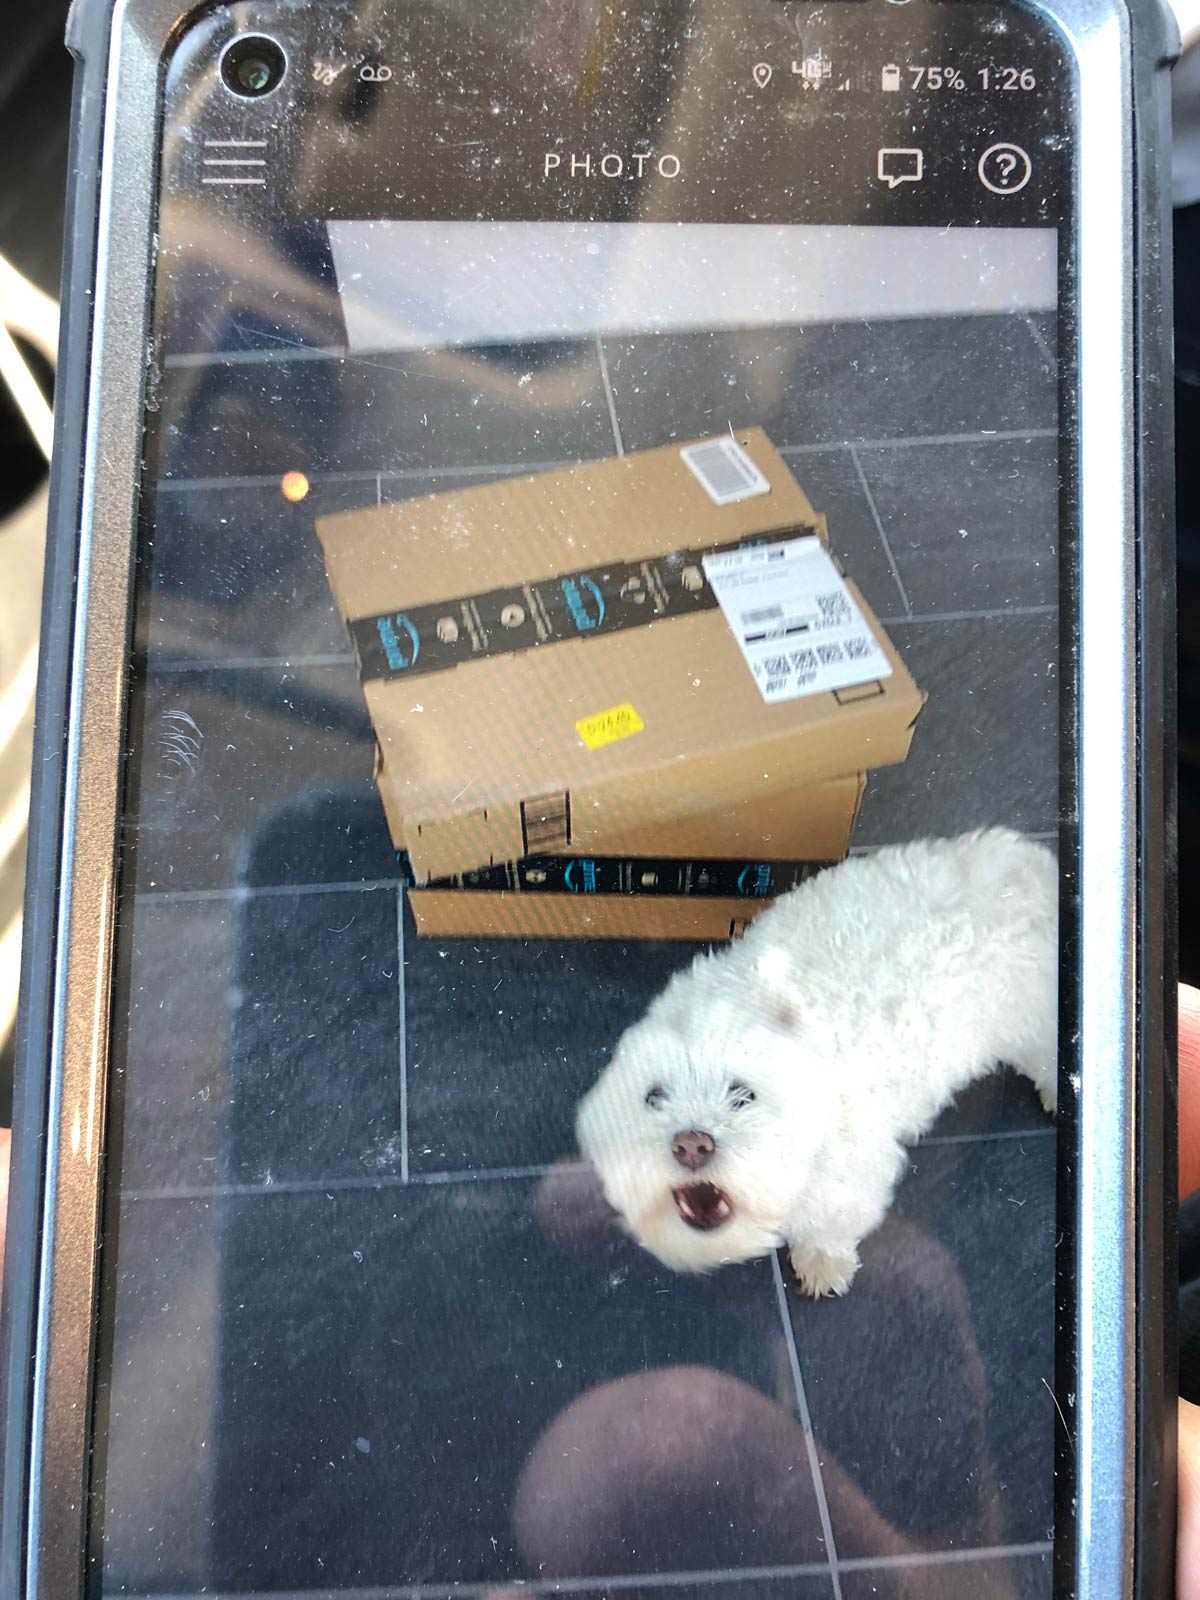 A vicious guard dog attacked me on my Amazon delivery today